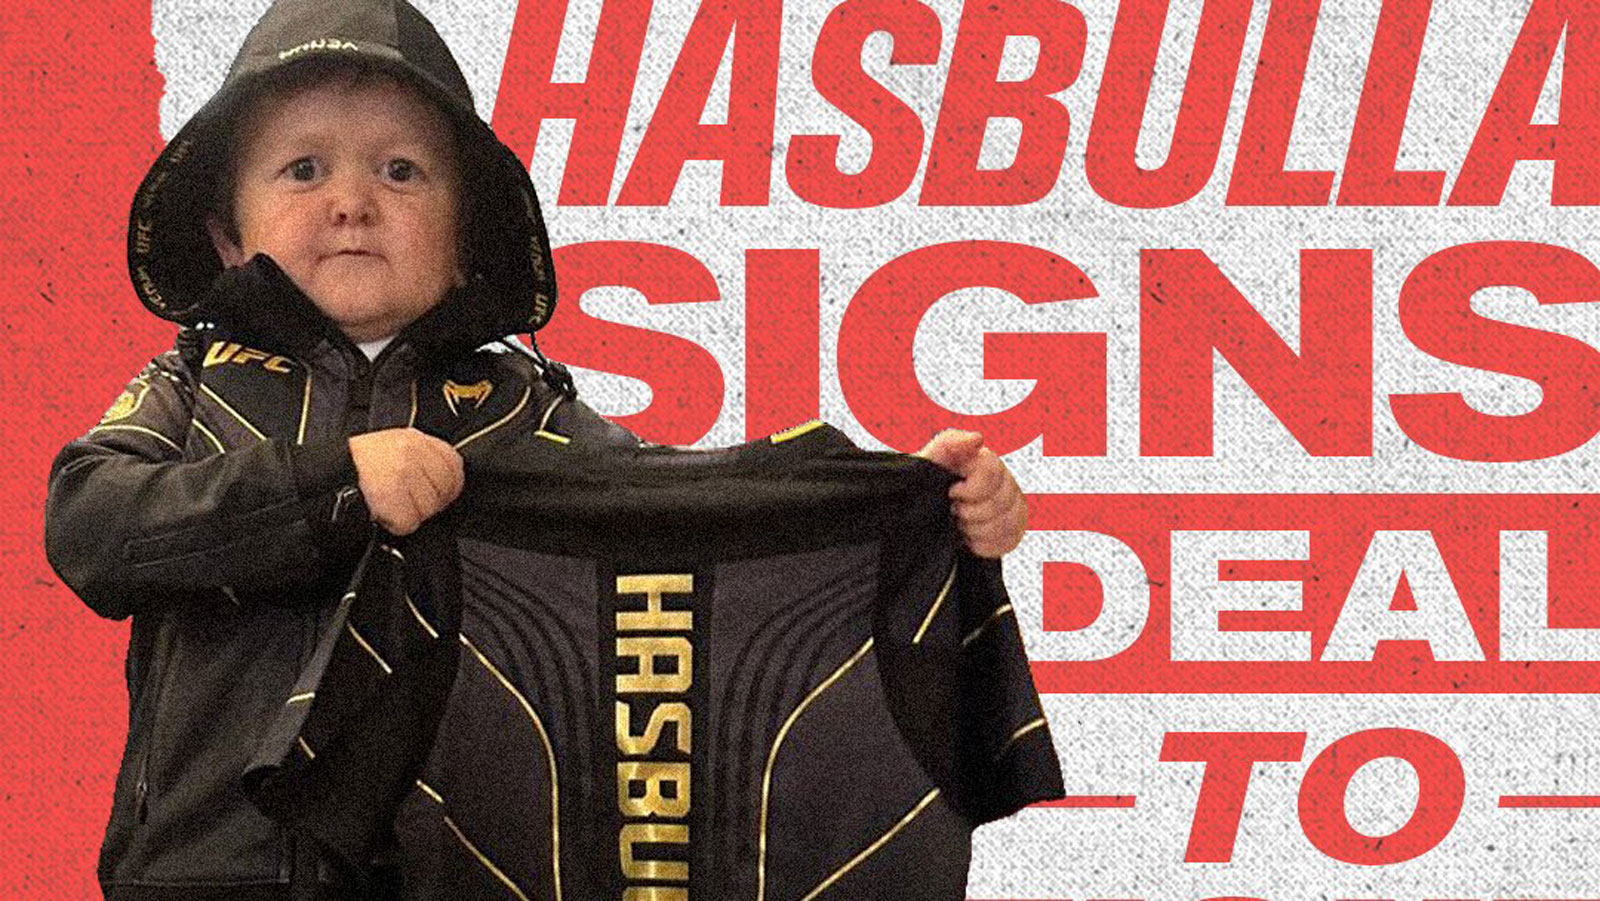 Hasbulla Signs With UFC, First Fight To Happen “By End Of The Year”